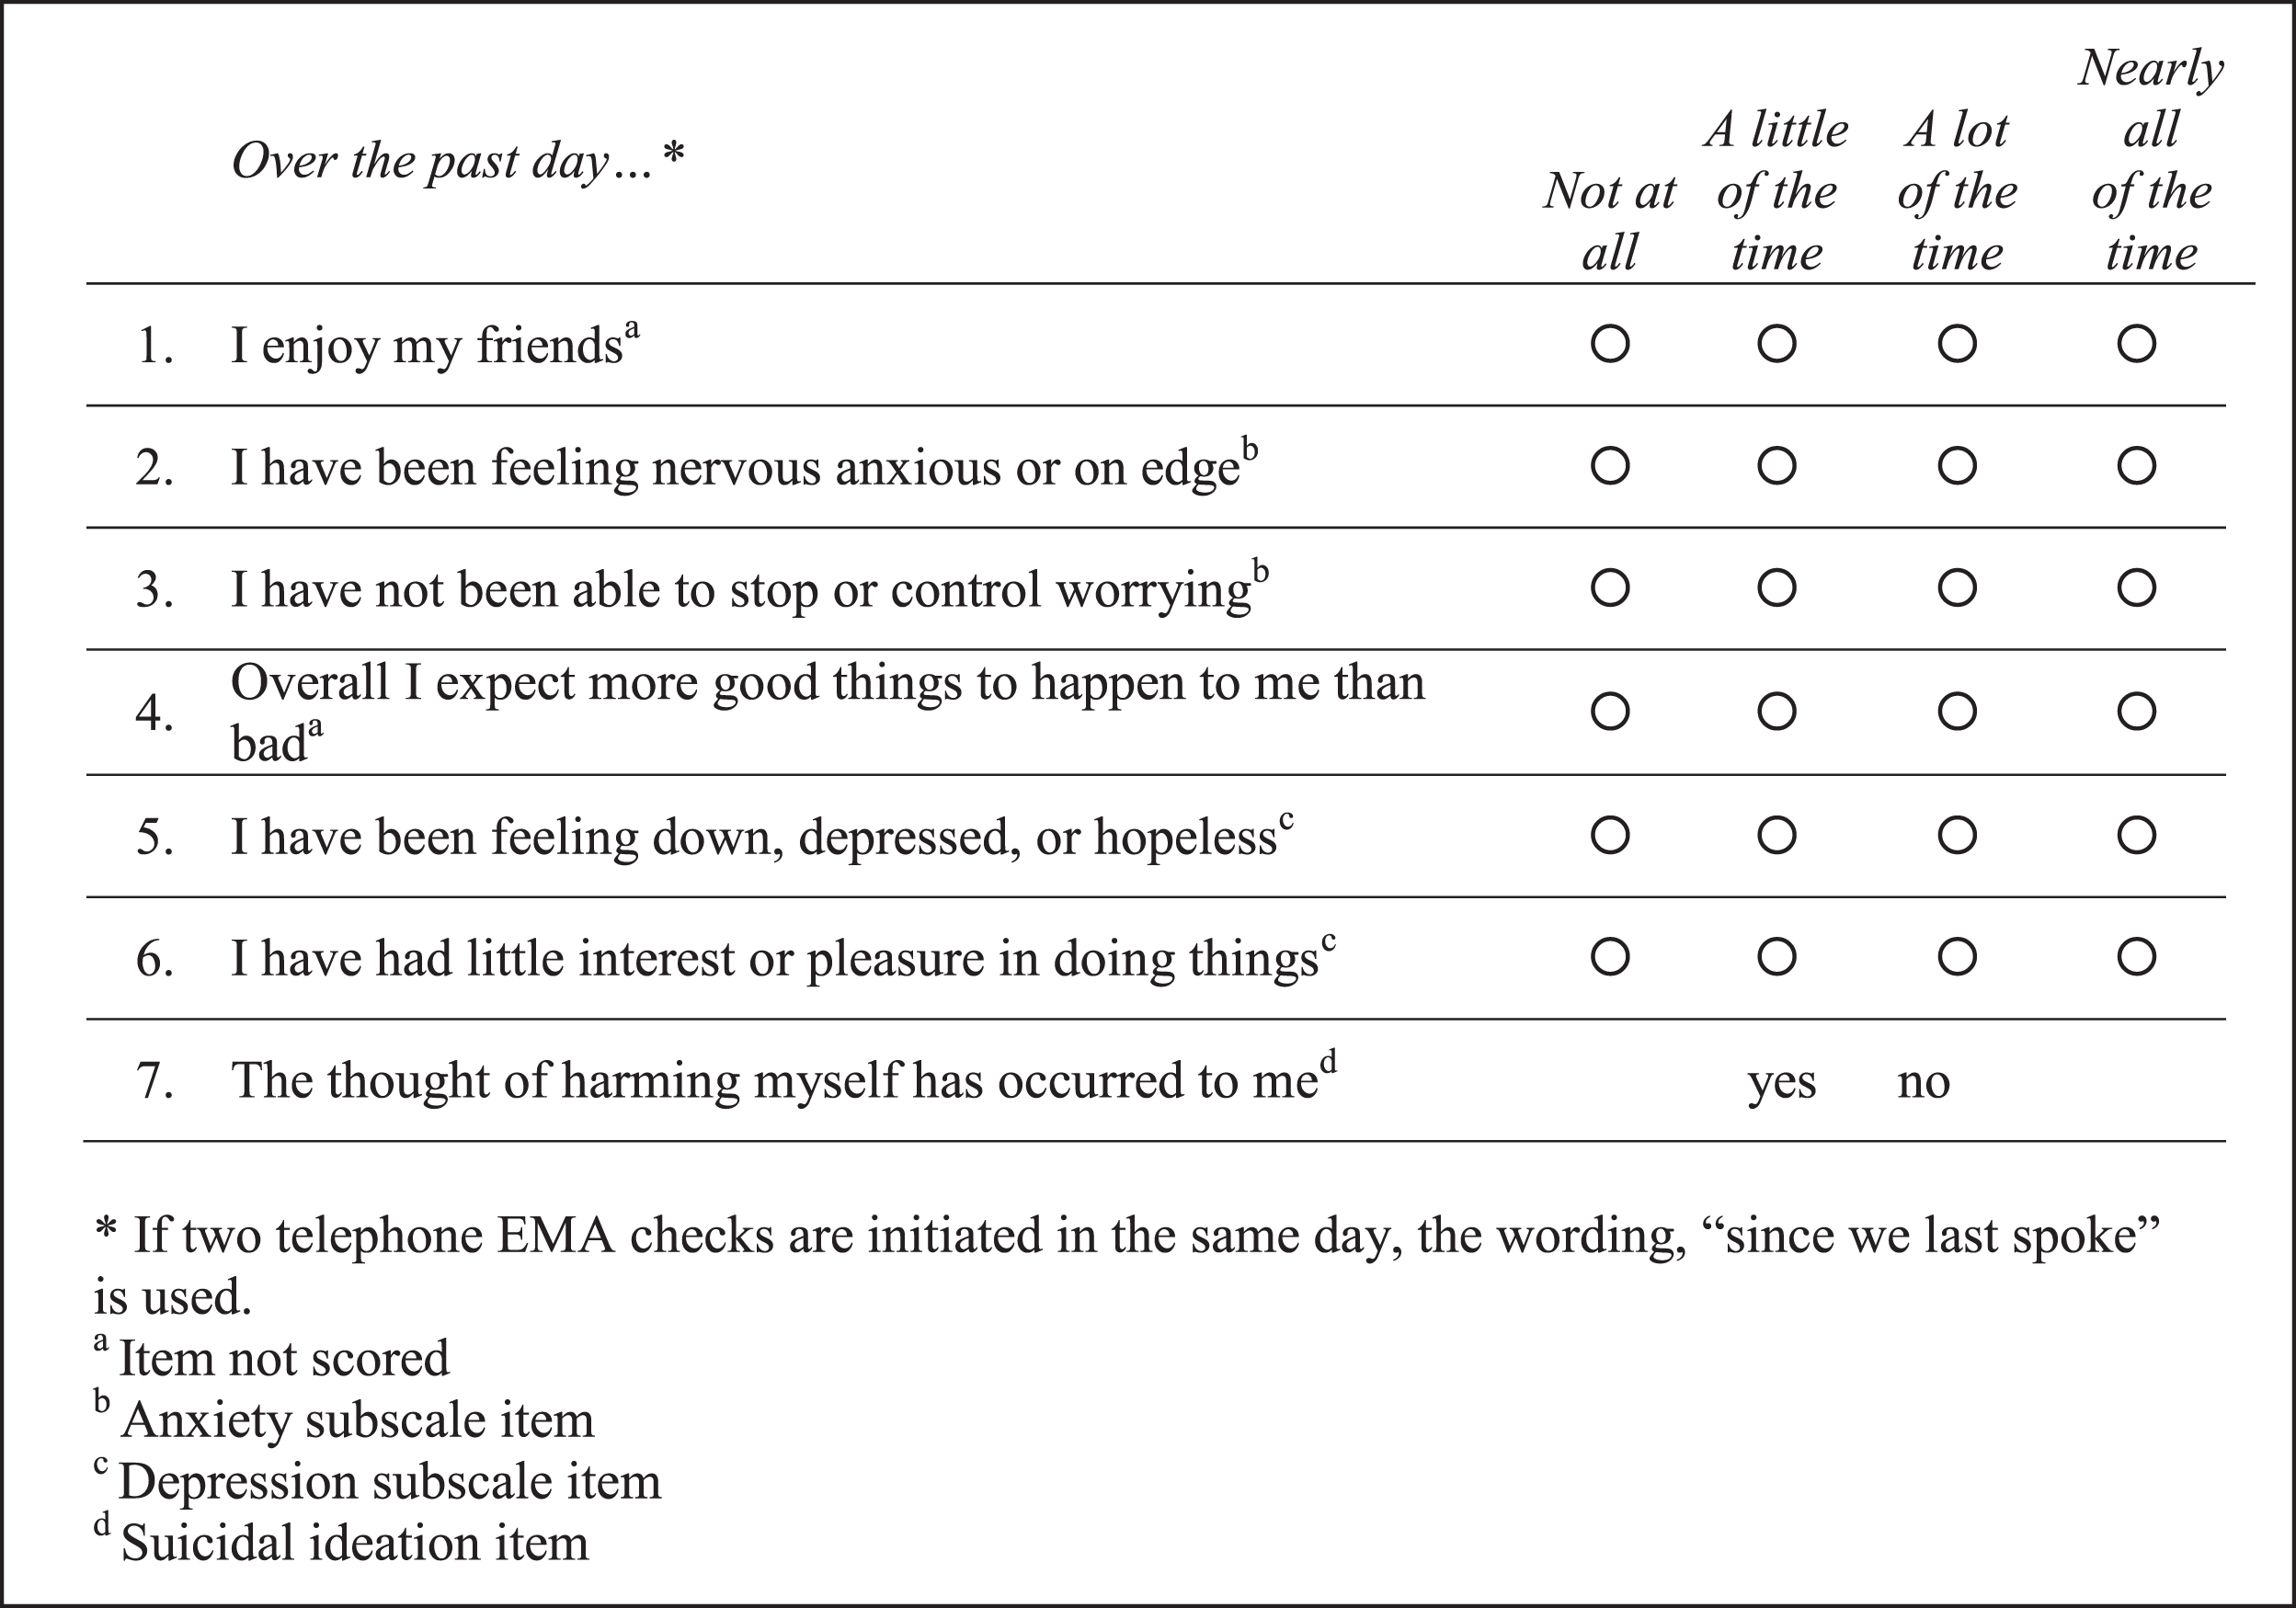 Ecological momentary mood assessment questionnaire items.